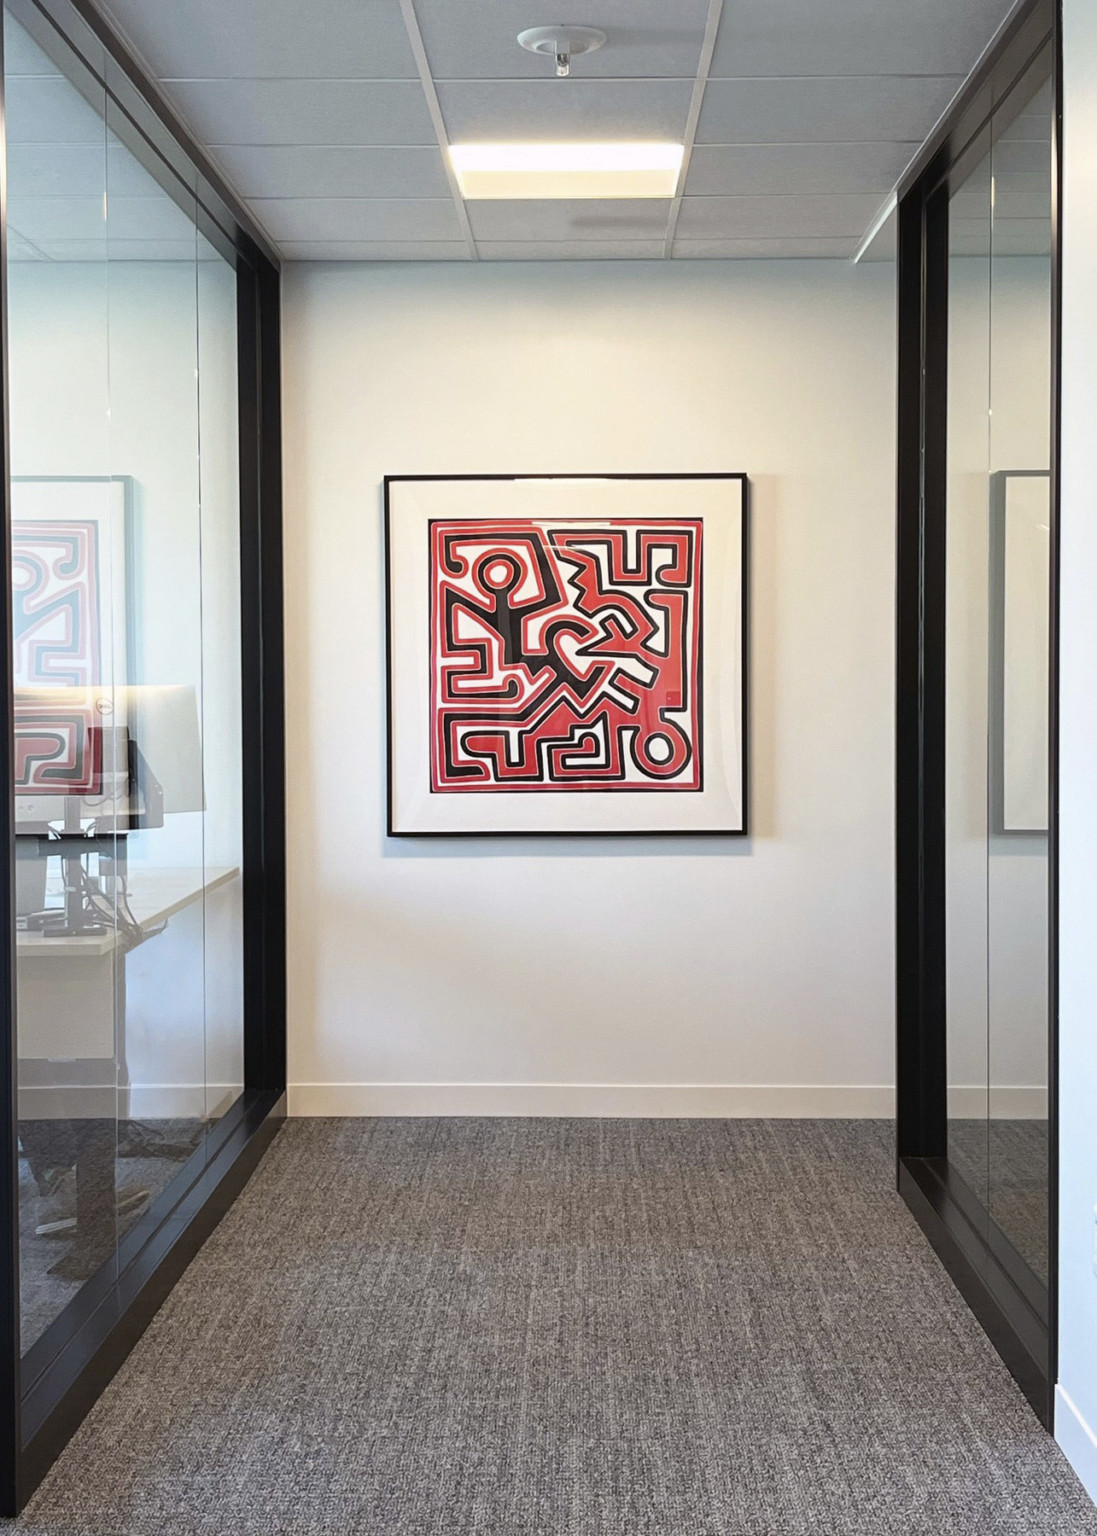 square framed red white and black keith haring print hanging at the end of hallway on white wall between glass movable walls